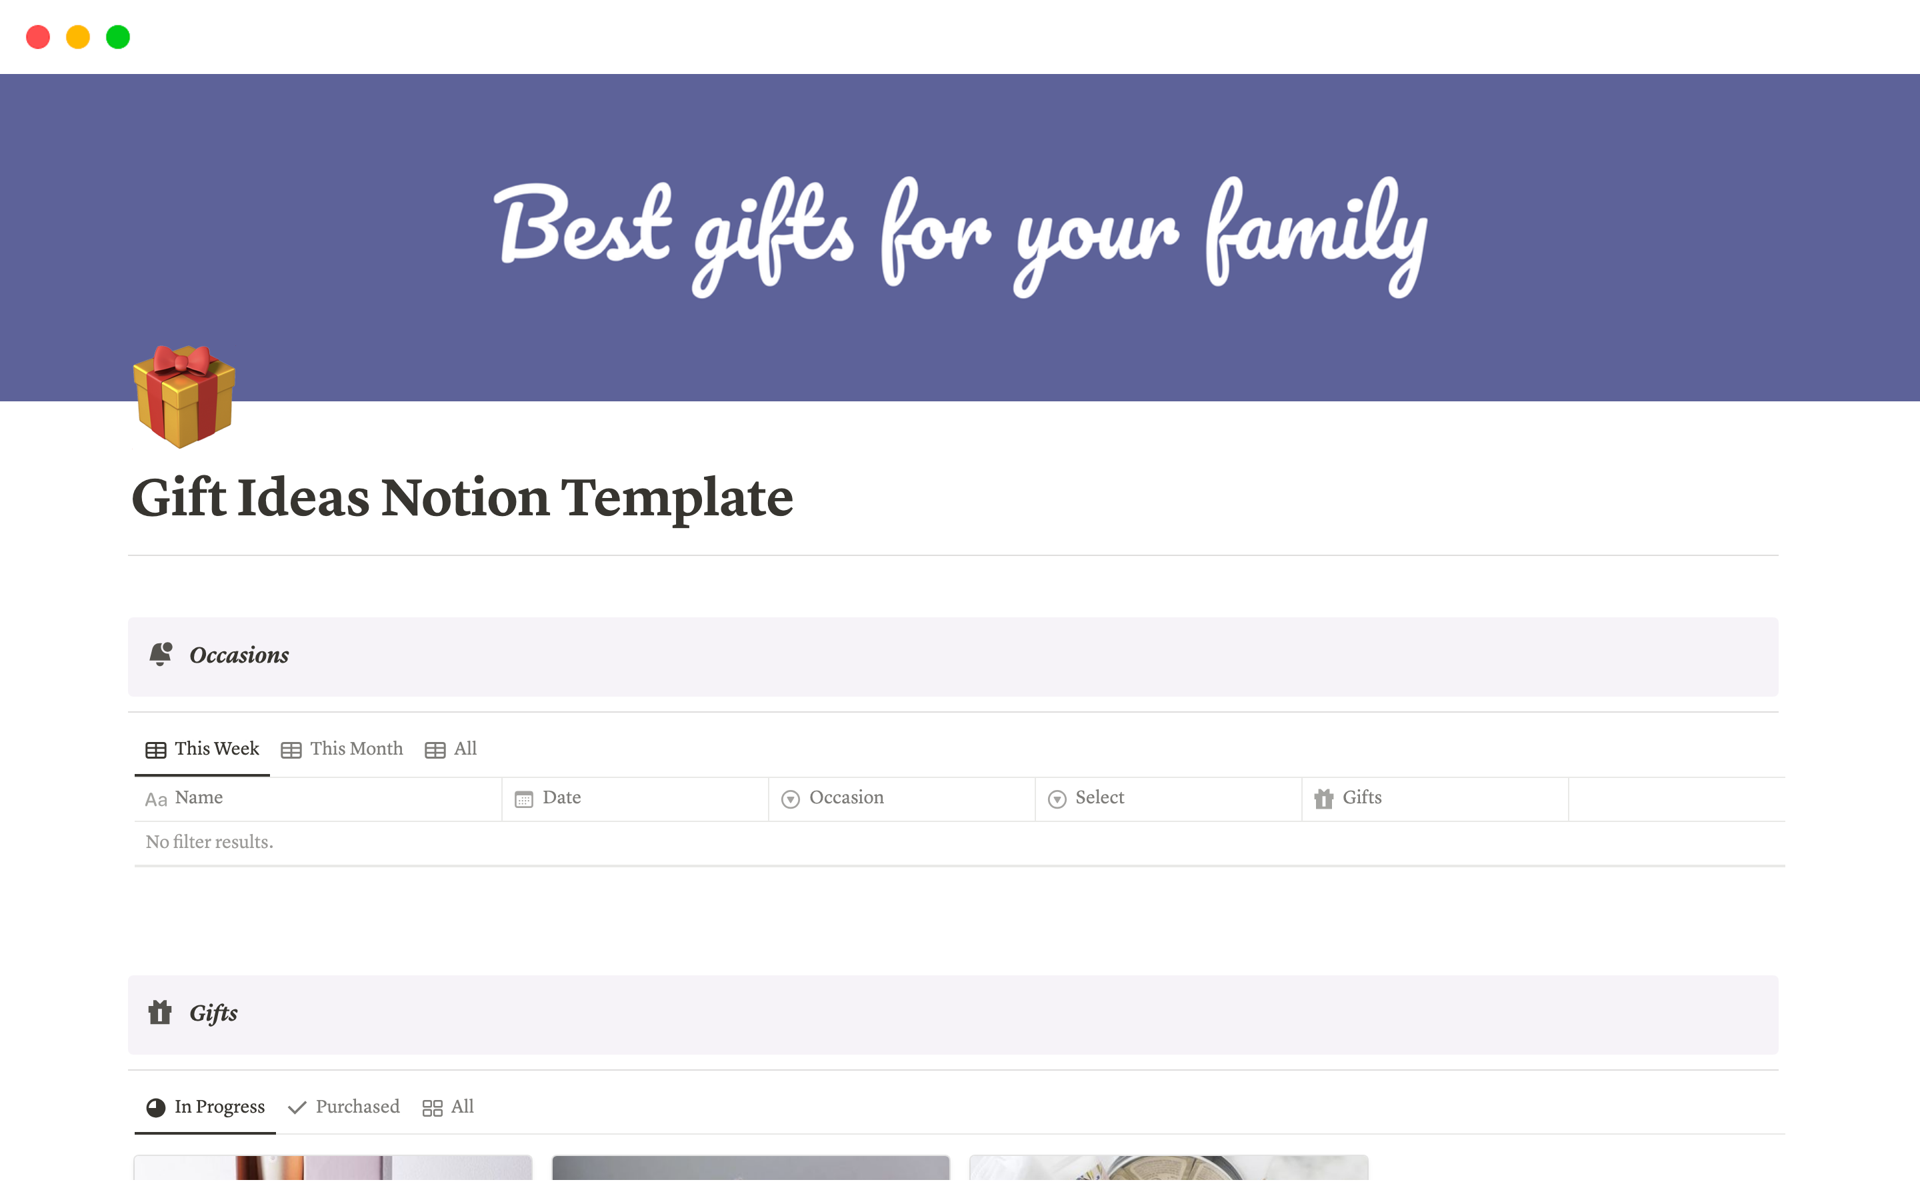 Effortlessly organize and track all your gift ideas in one place. Never forget a special occasion or gift again!